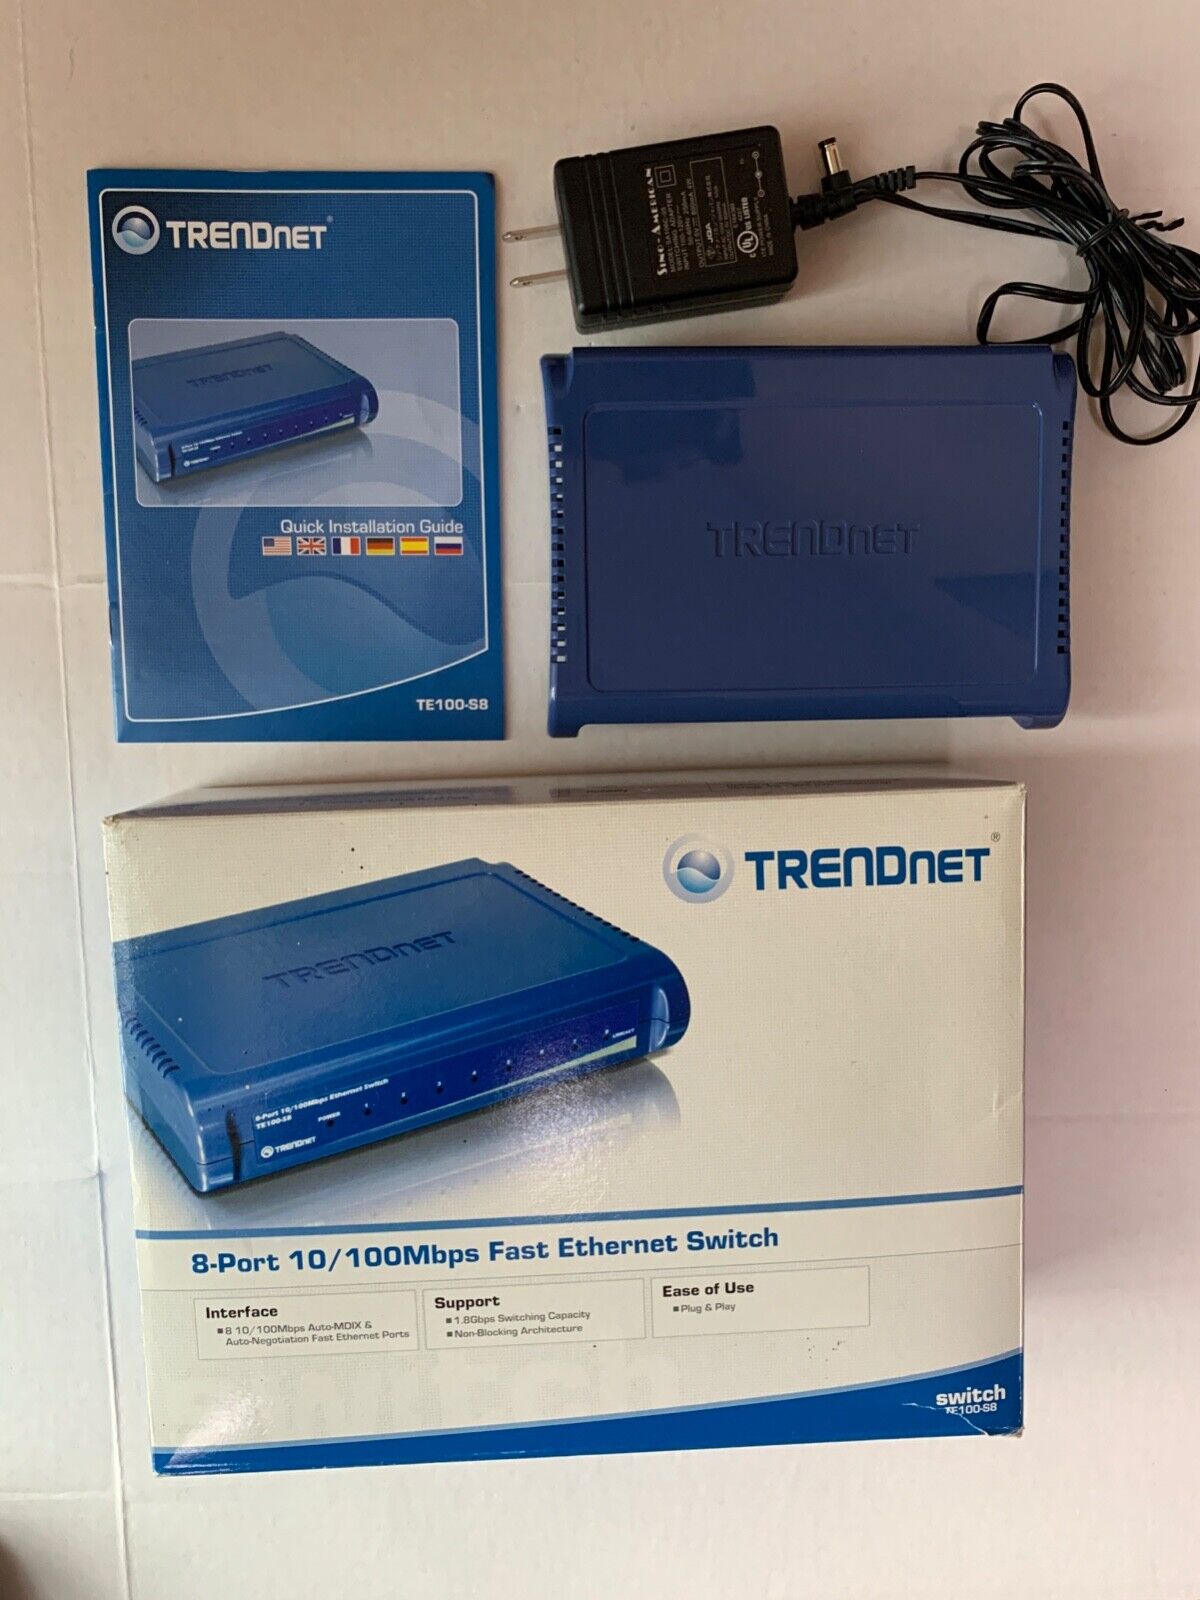 TRENDnet TE100-SB  8-Port 10/100Mbps Fast Ethernet Switch with Box and Manual